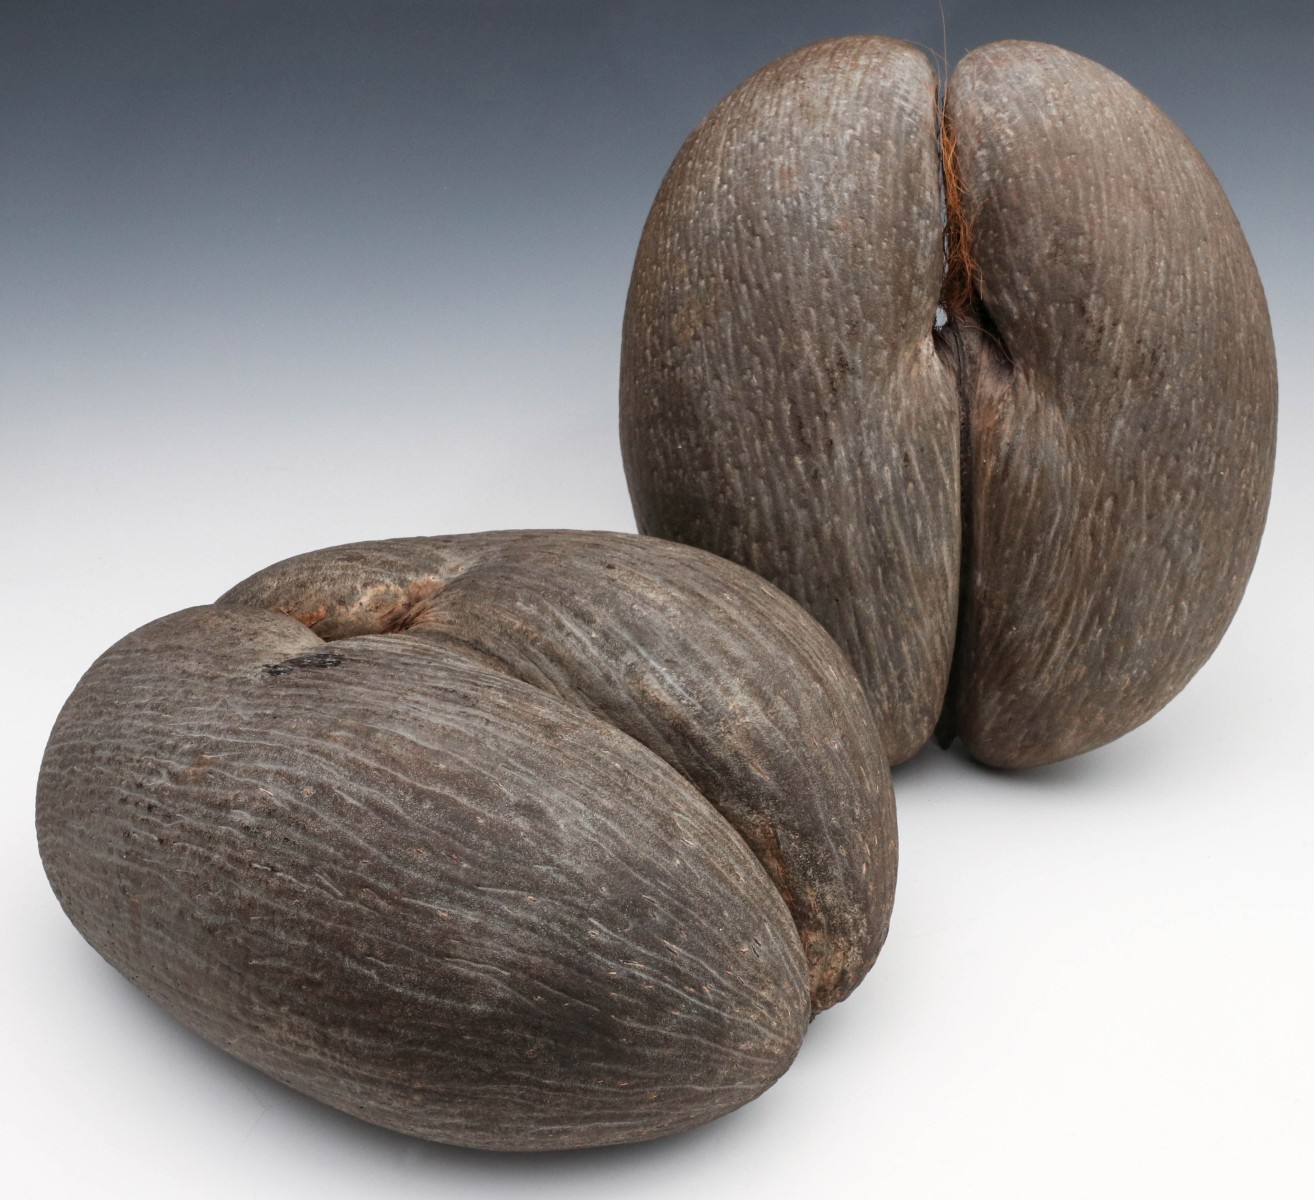 TWO GIANT COCO DE MEER SEED PODS